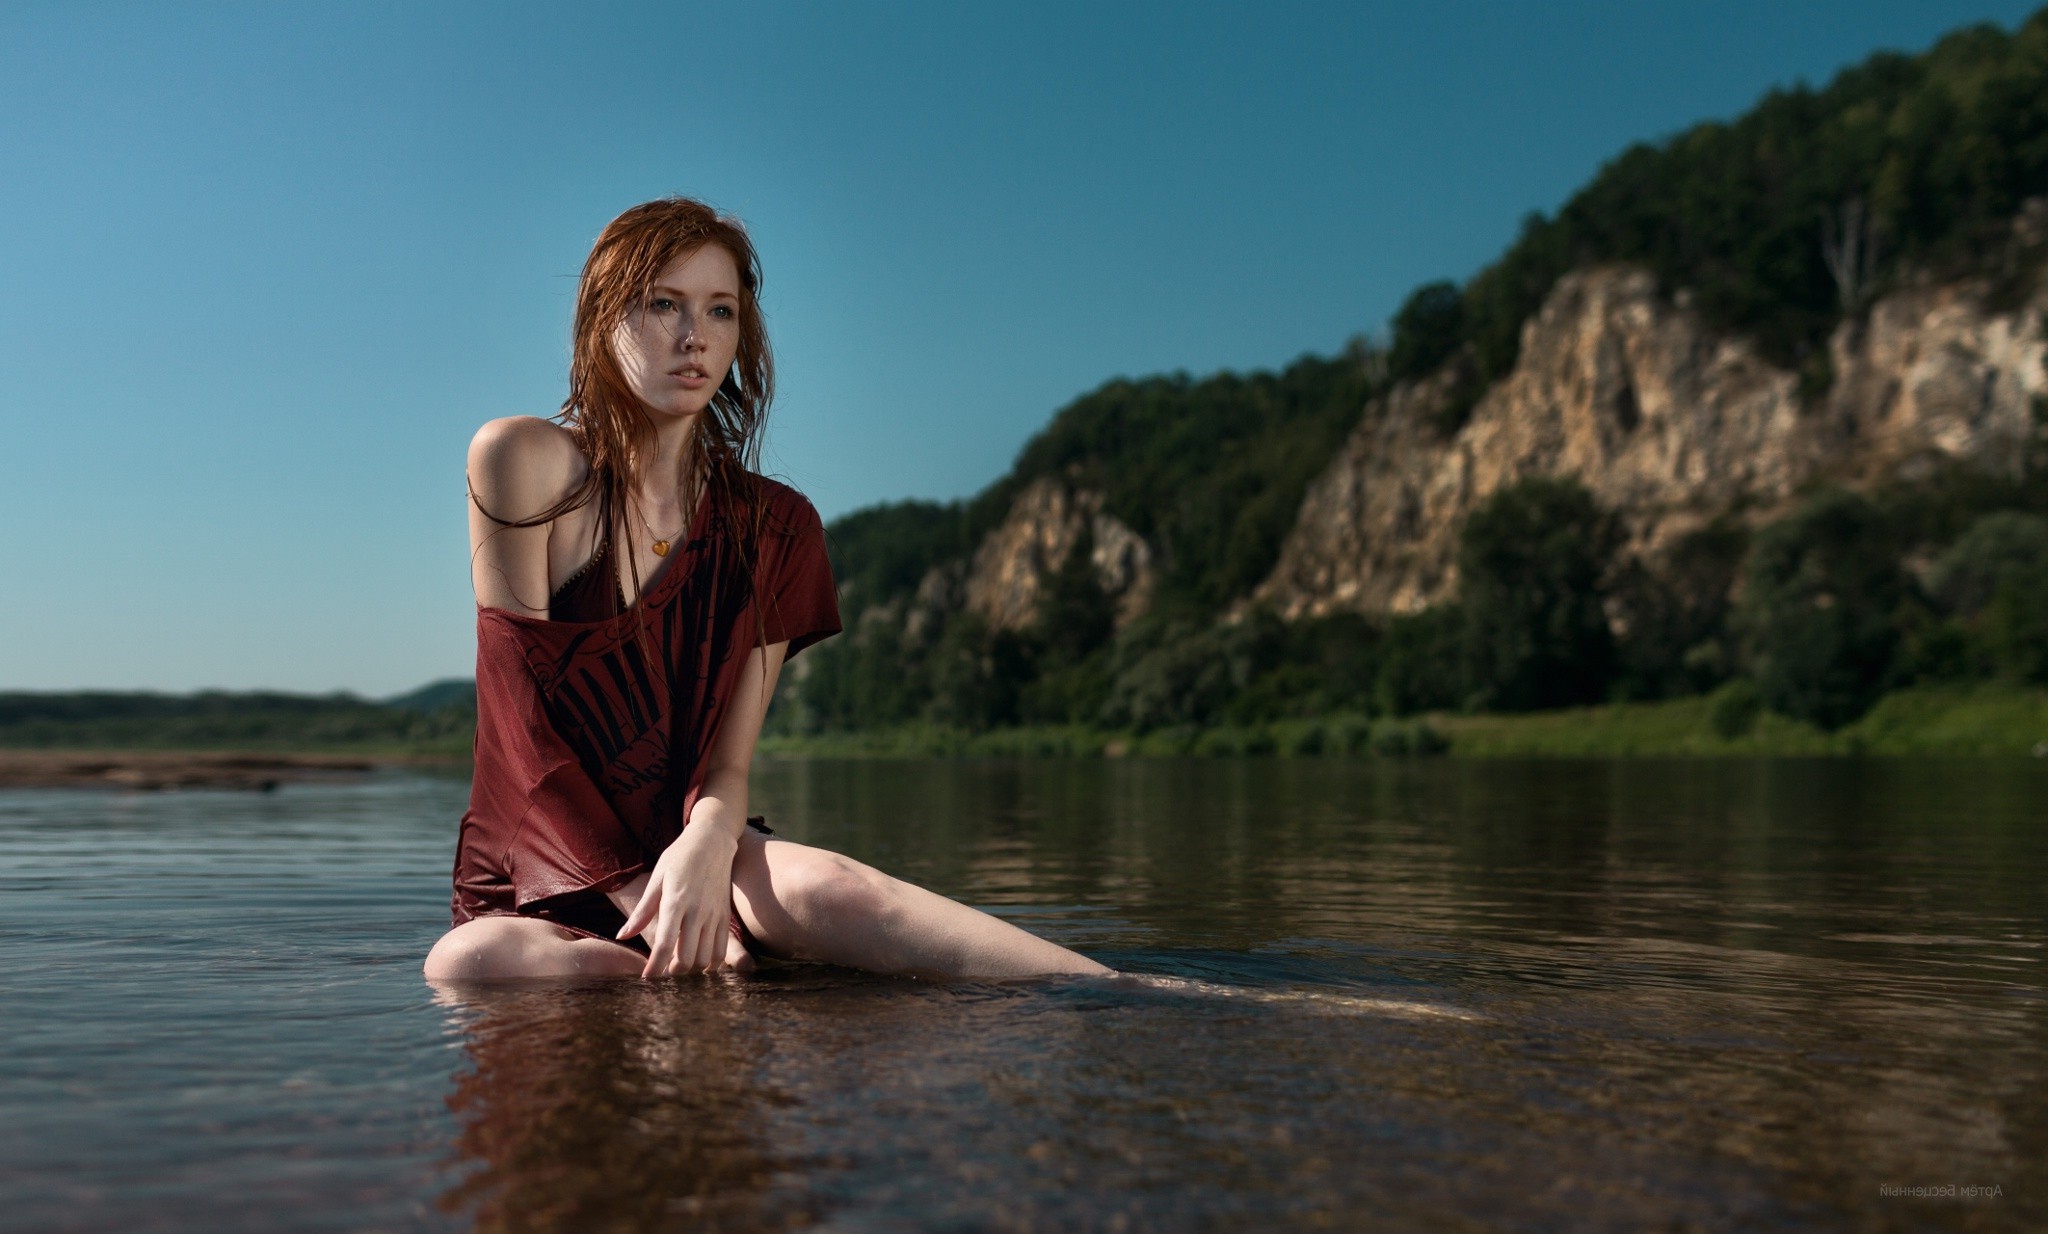 People 2048x1234 women sitting water lake nature redhead sea model freckles women outdoors outdoors legs wet body T-shirt bare shoulders